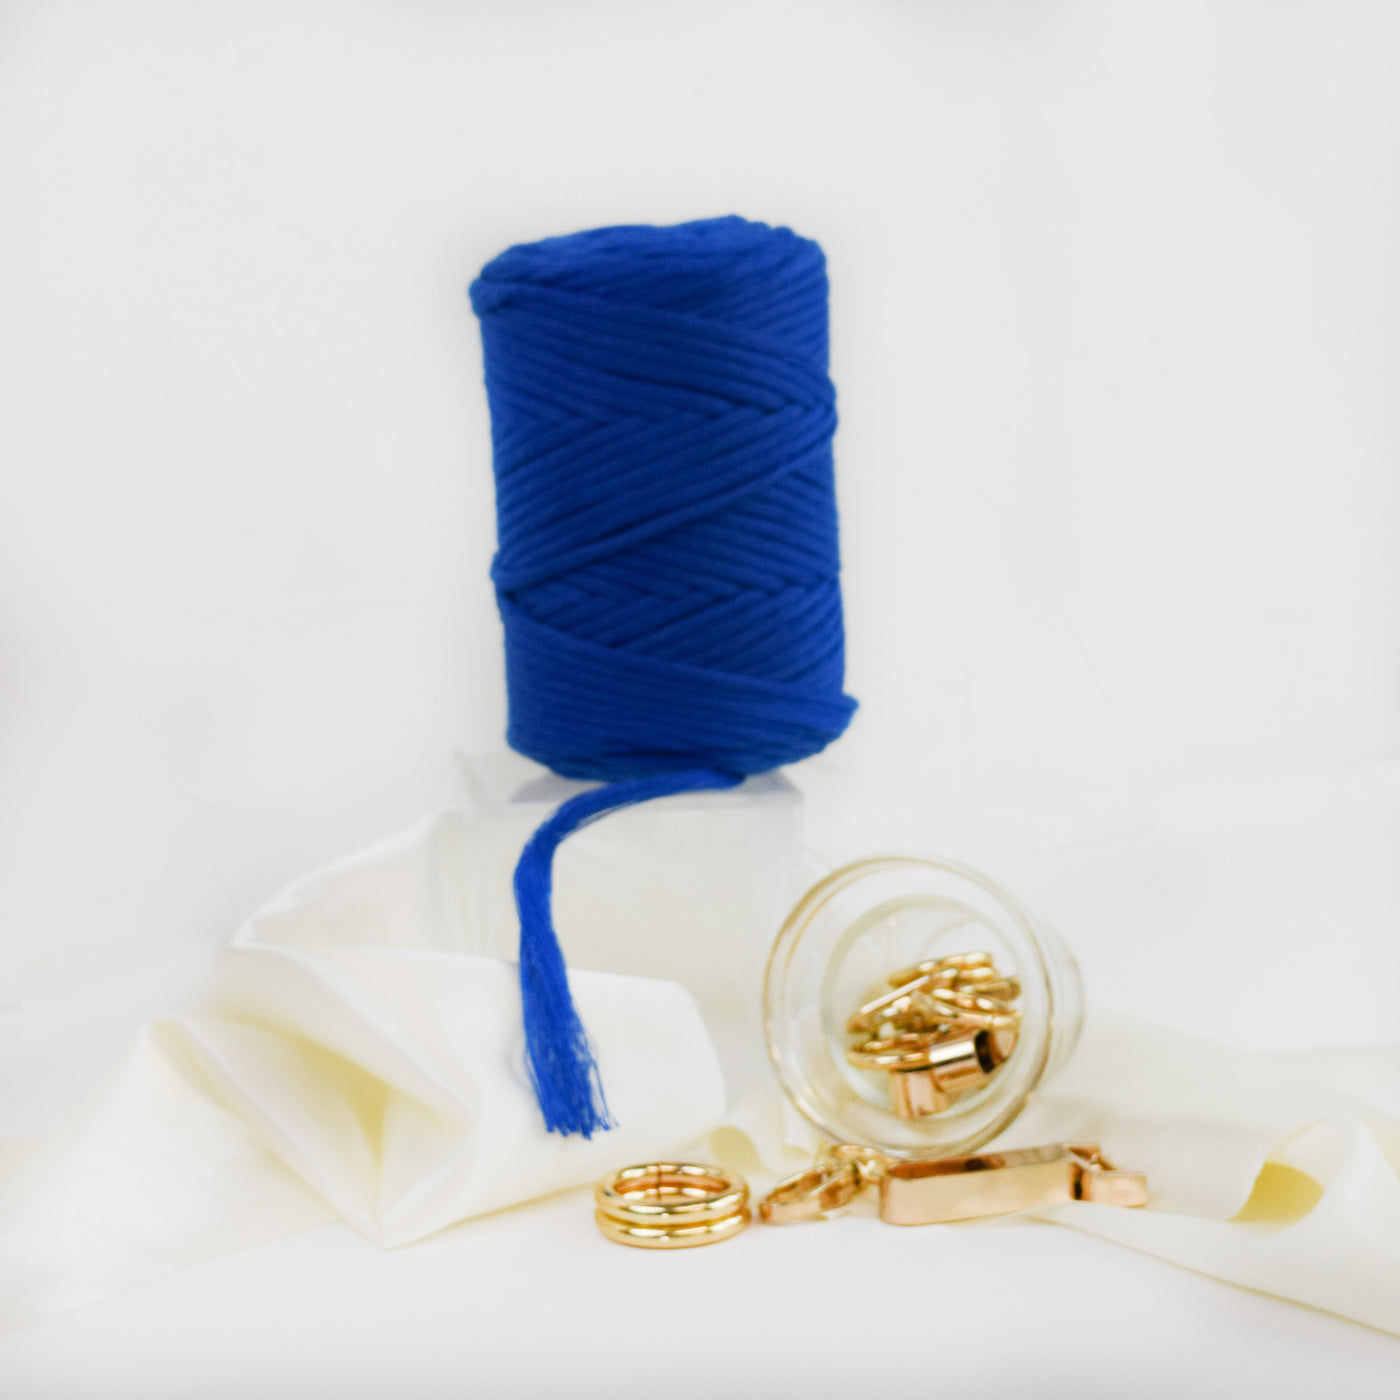 COTTON - VISCOSE ROLL 4 MM - ROYAL BLUE COLOR | LIMITED EDITION